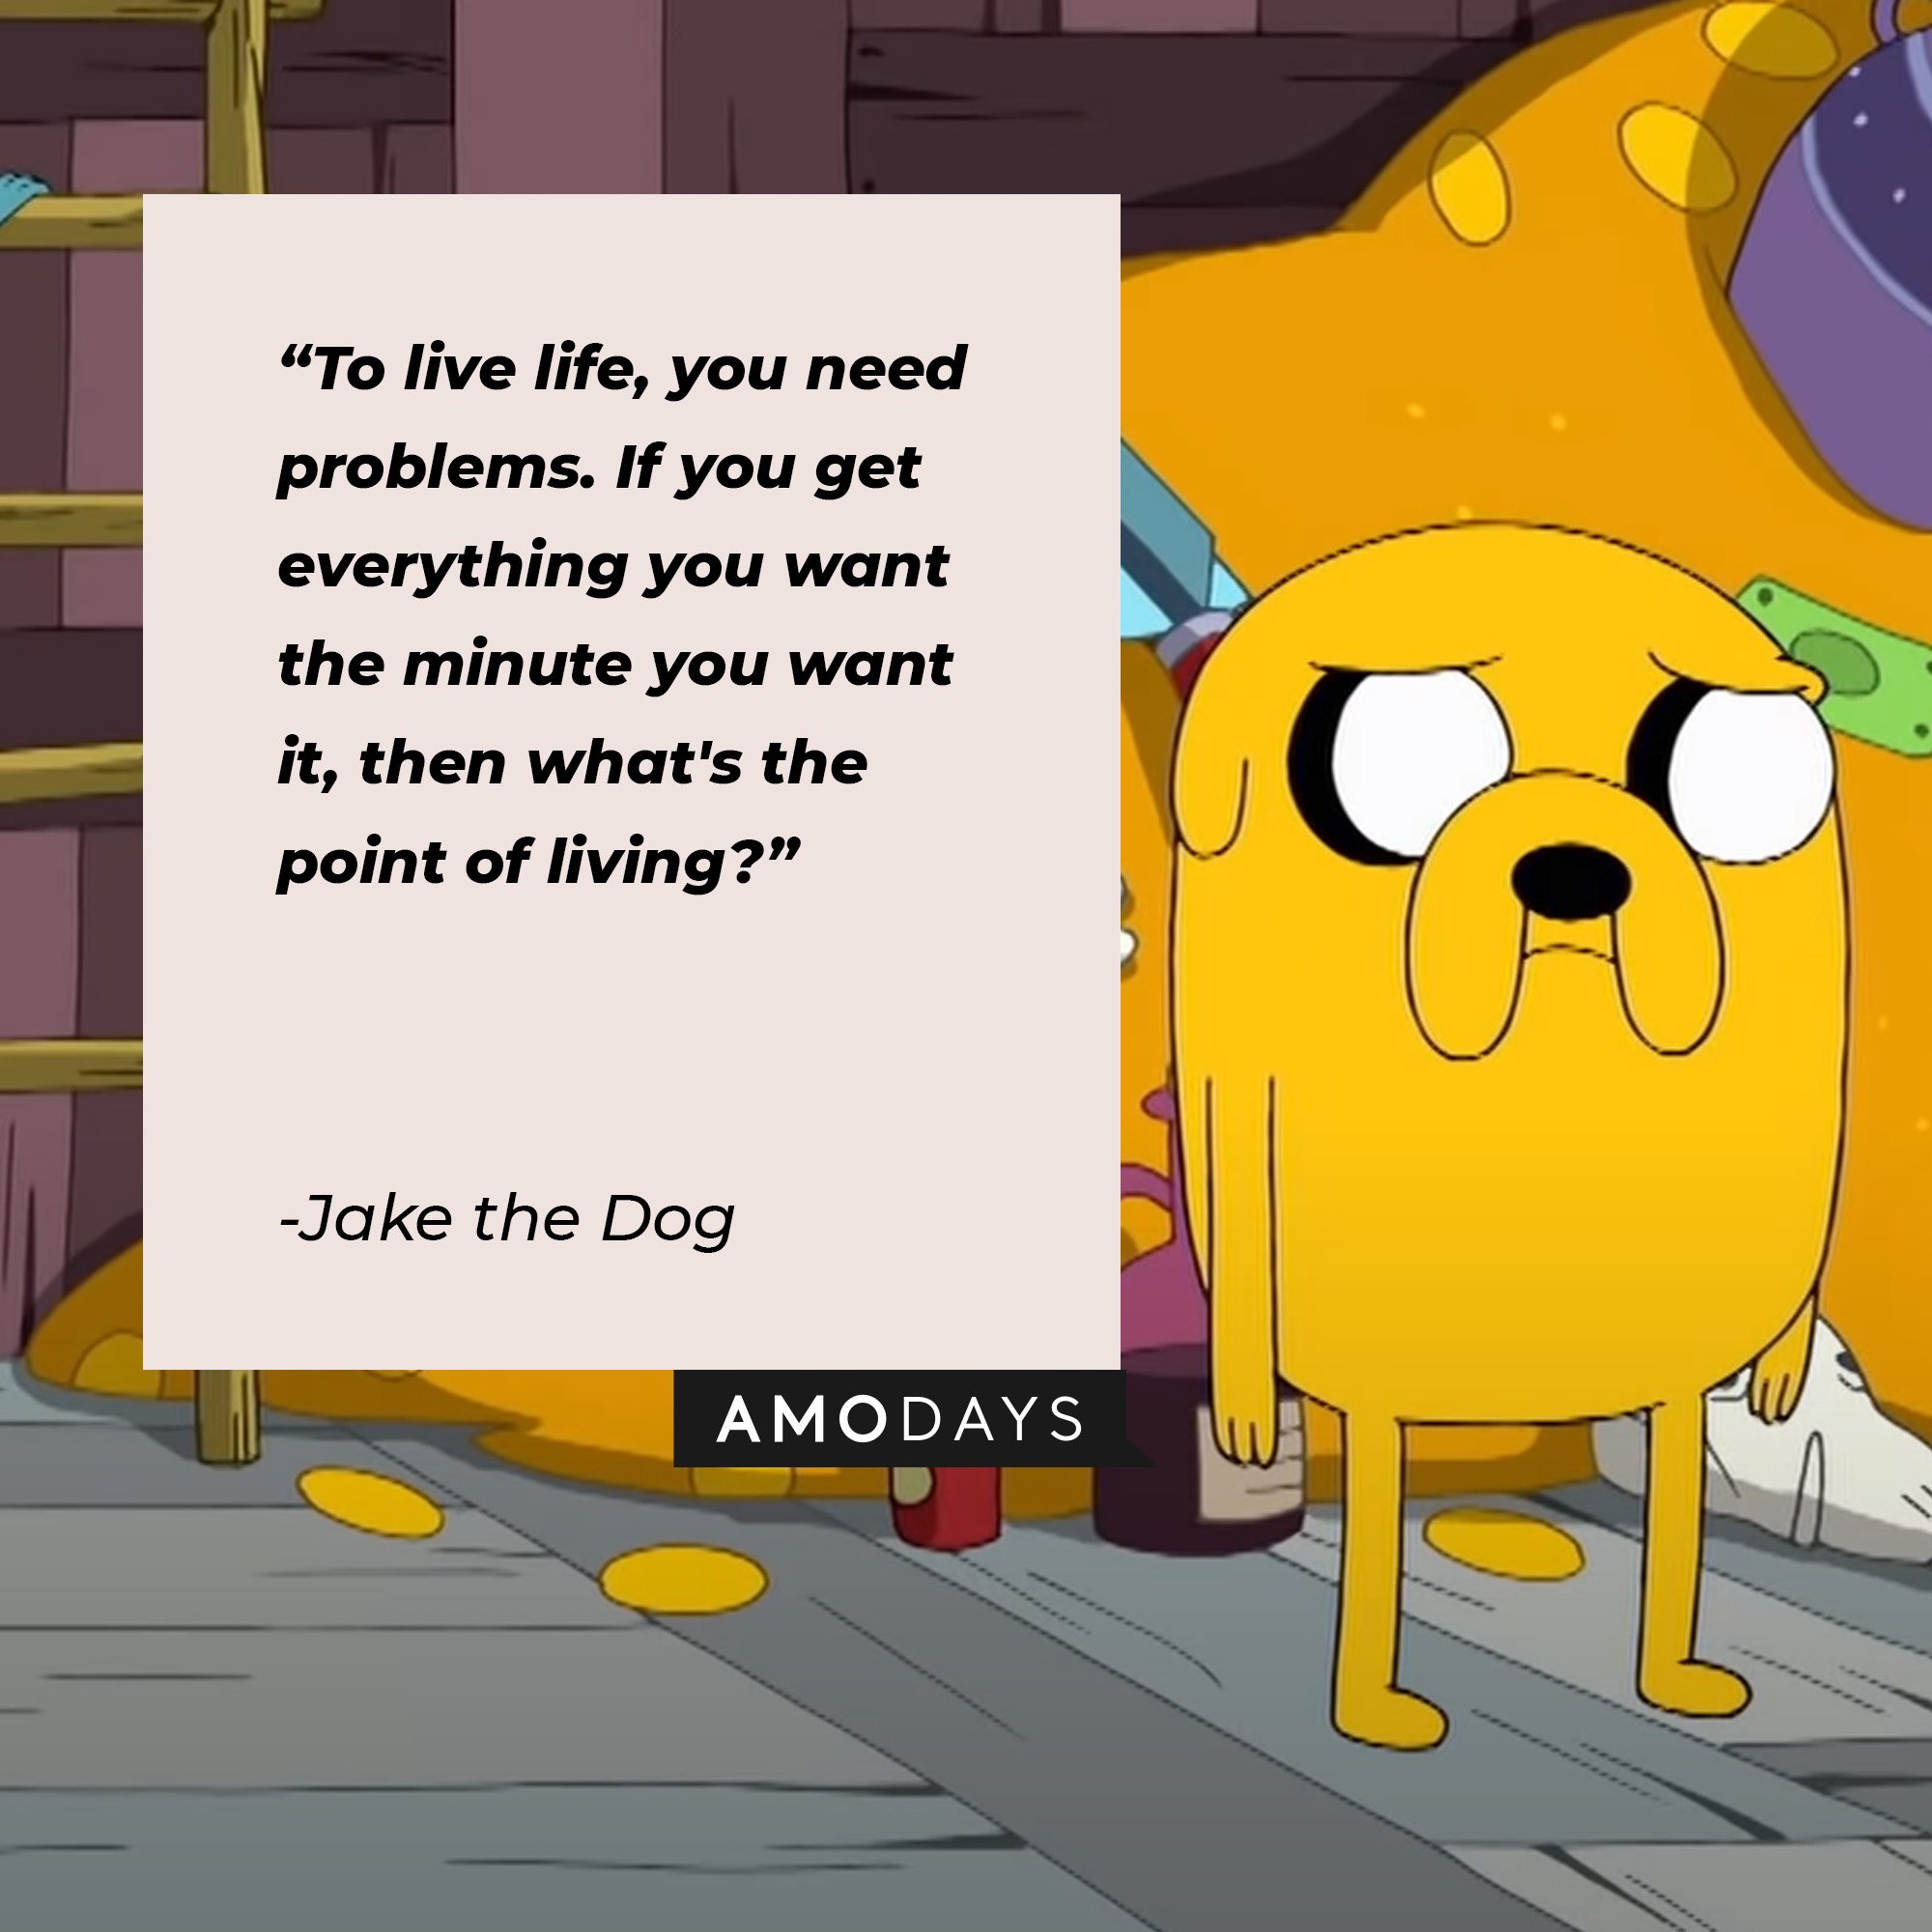   Jake the Dog’s quote: "To live life, you need problems. If you get everything you want the minute you want it, then what's the point of living?" |  Image: AmoDays